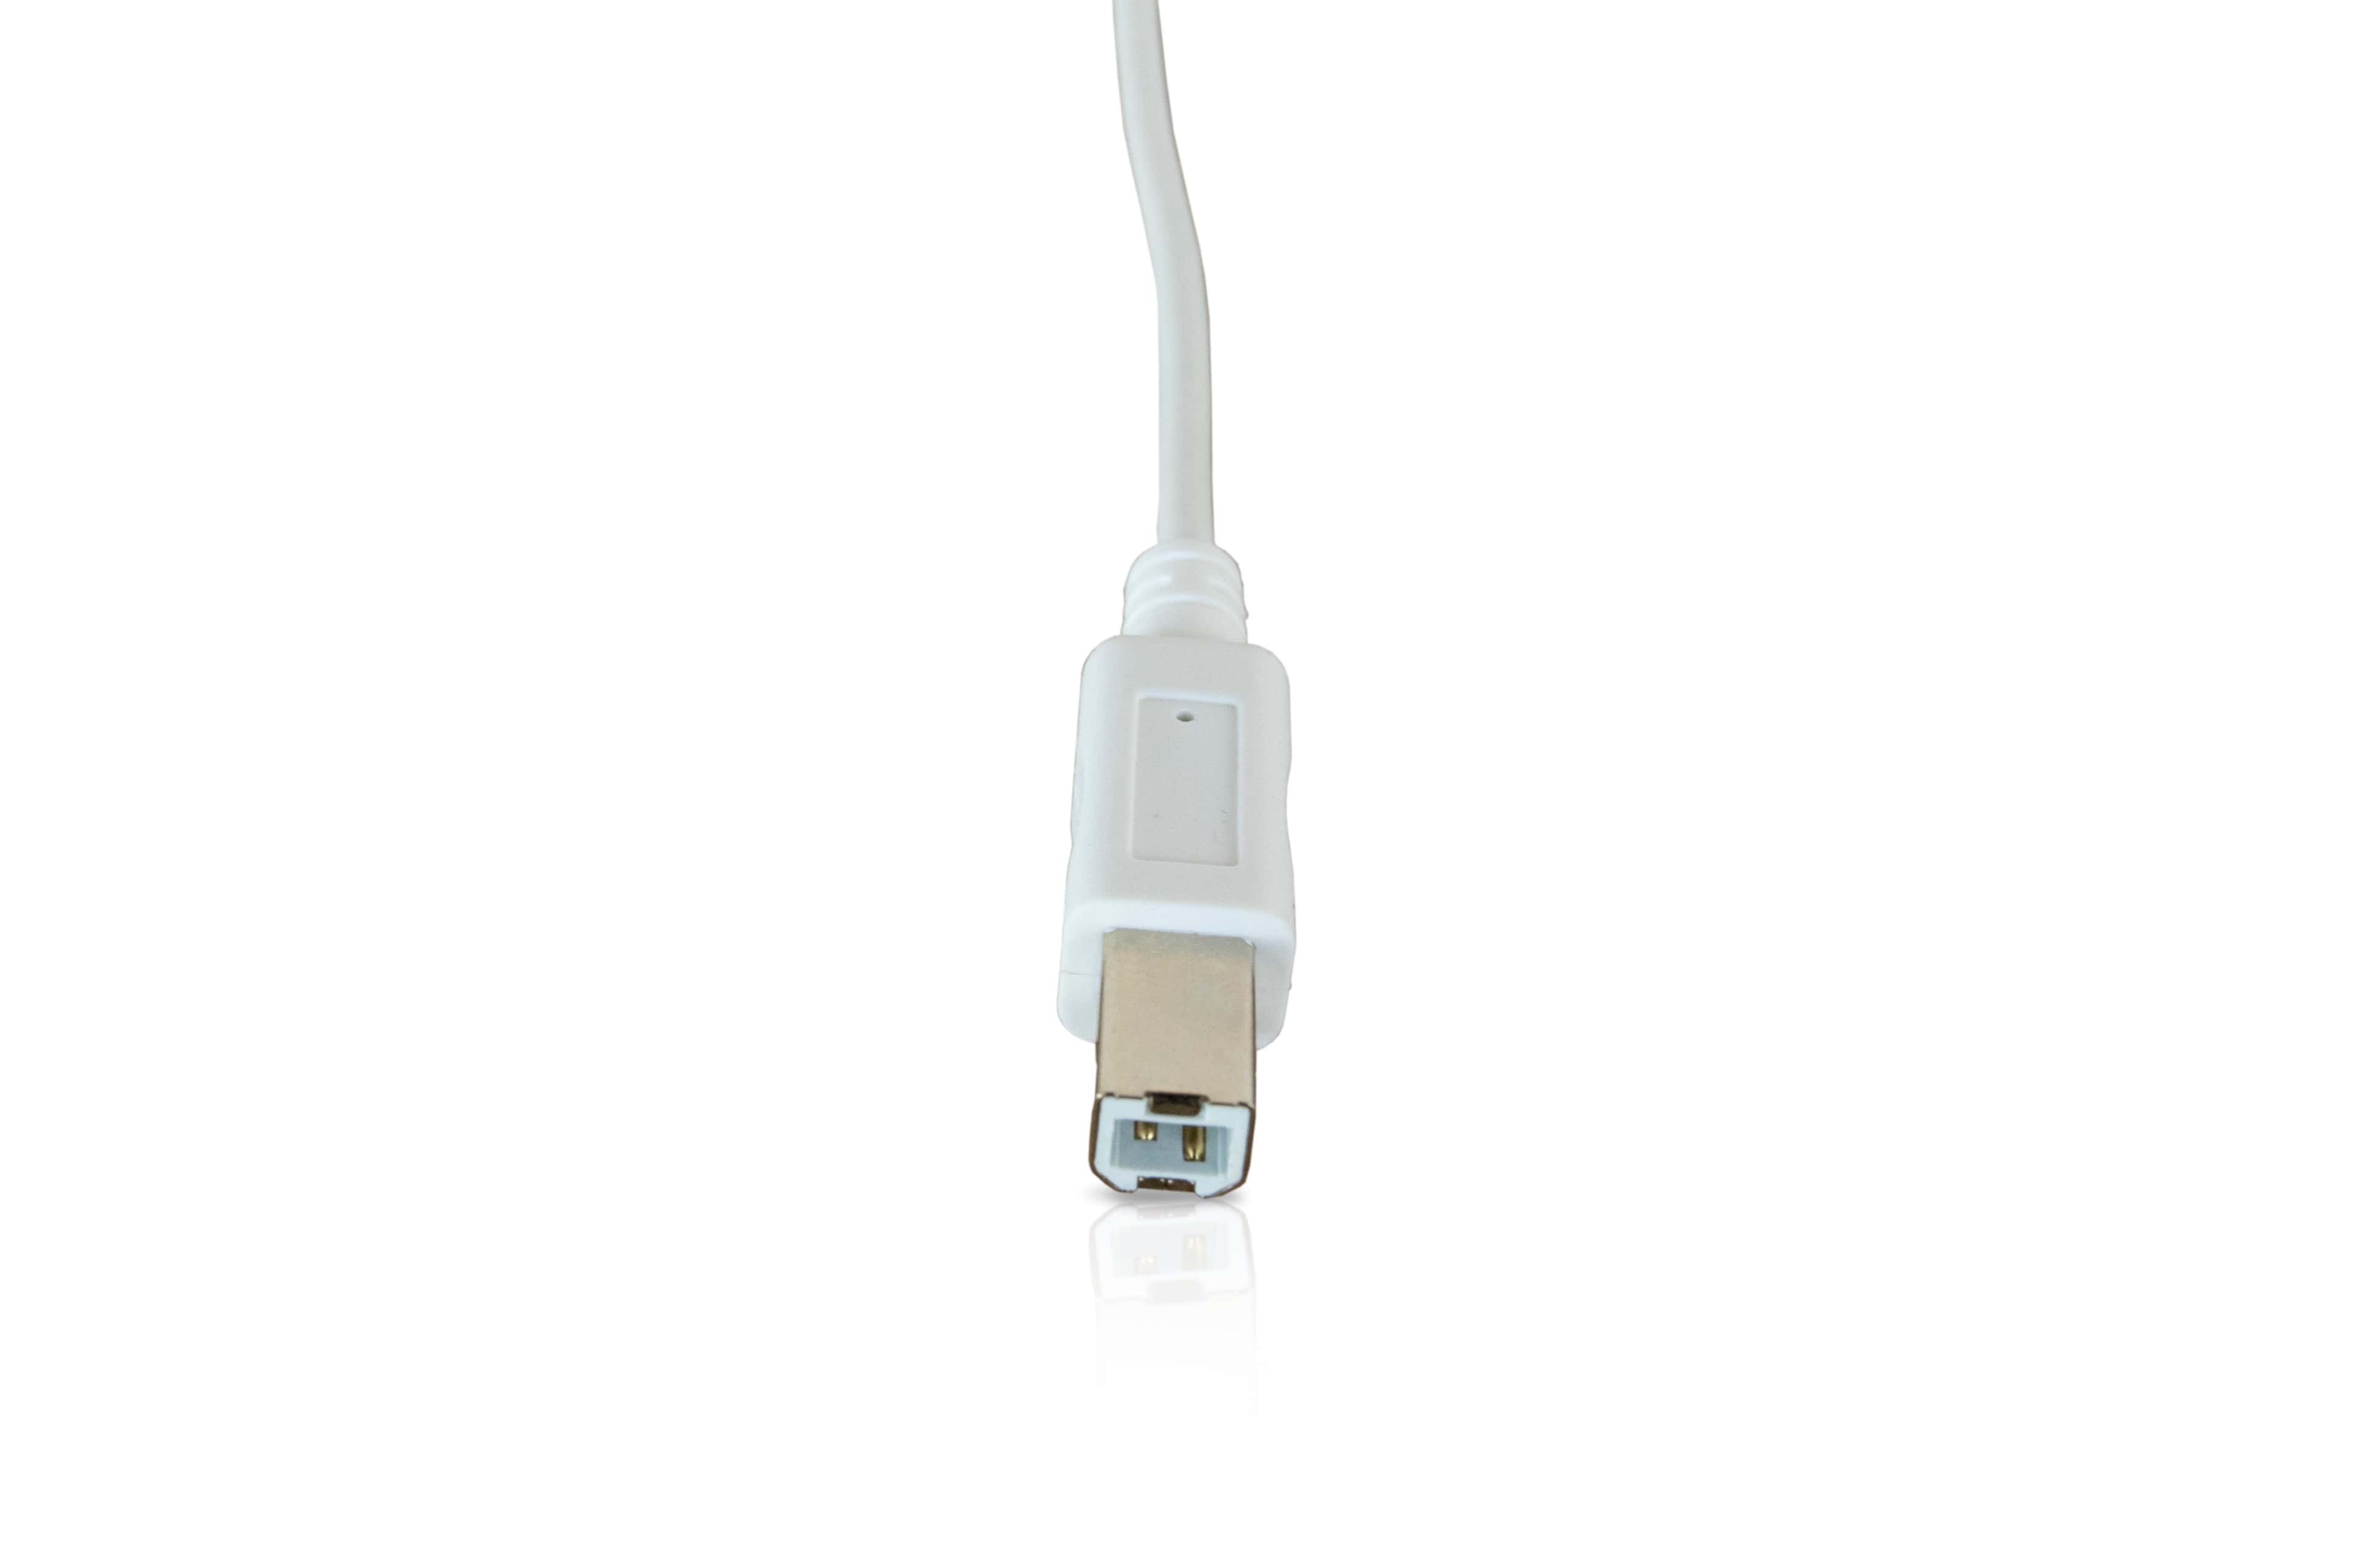 POWER X USB 2.0 PRINTER A TO B CABLE 1.5 METER